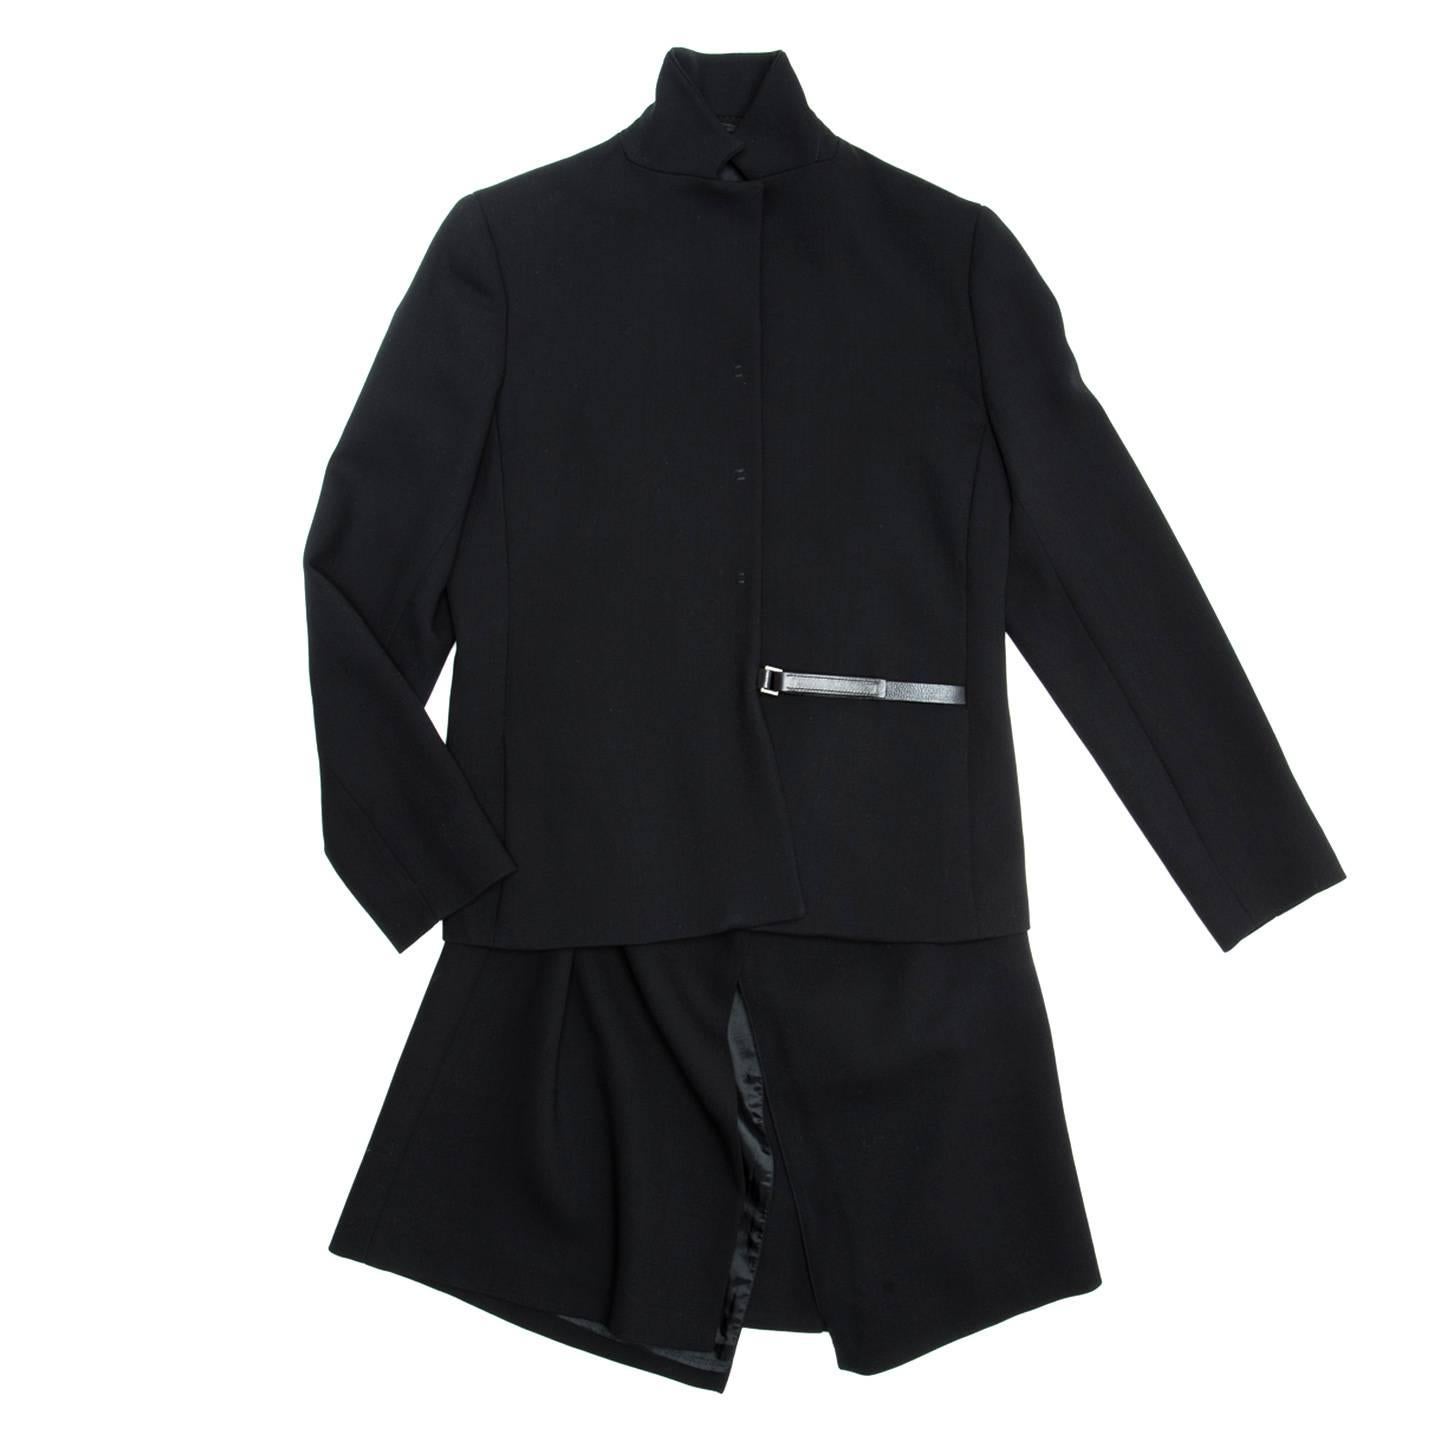 Black virgin wool skirt suit with leather detail. The jacket is hip length, has a small notched collar, vertical slit pockets, a 3 covered snap buttons front opening with tack details and a leather strap and buckle closure at waist line. The skirt